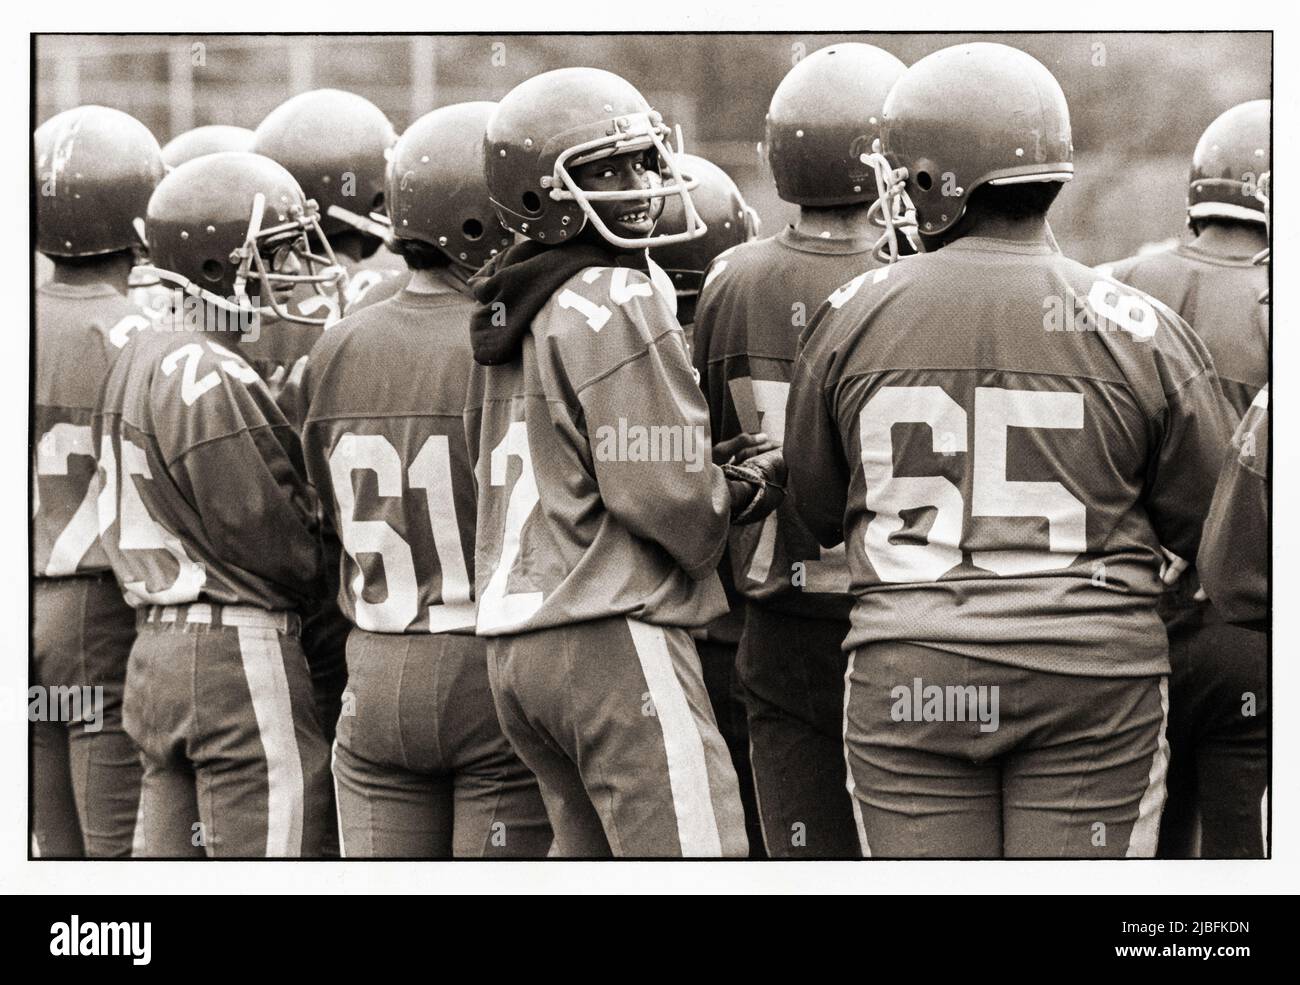 FACE IN THE CrOWD. Member of the John Jay High School football team at a 1982 practice session in Prospect Park, Brooklyn, New York City. Stock Photo